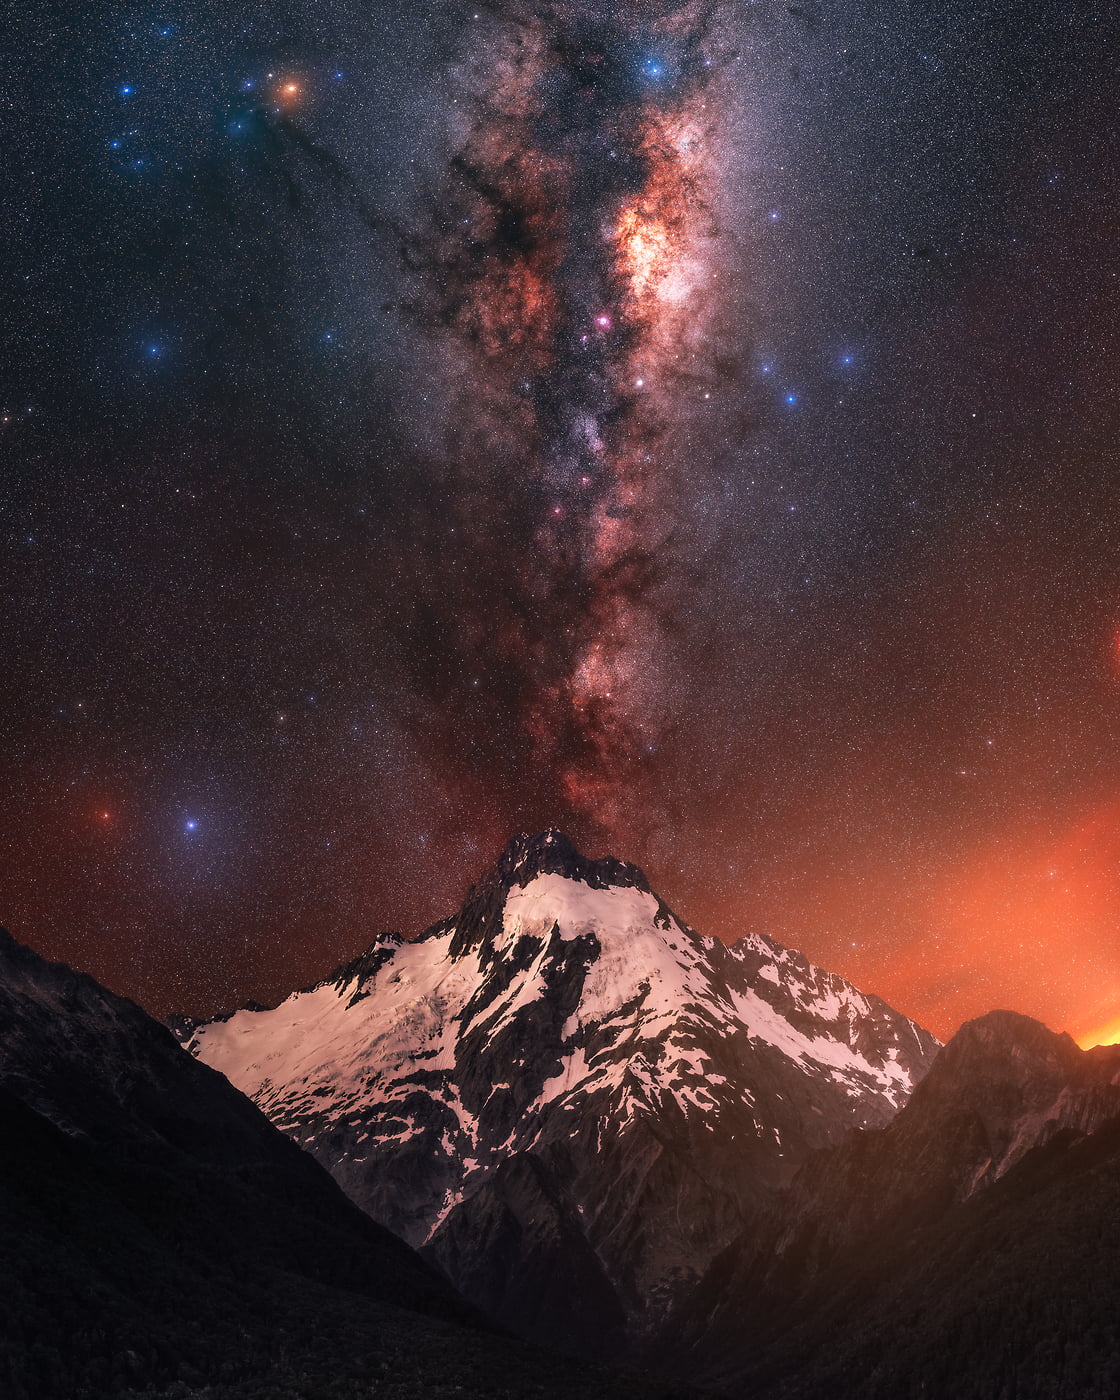 229 megapixels! A very high resolution, large-format VAST photo print of a mountain landscape at night with the Milky Way and stars in the sky and snow covered mountains in the foreground; fine art astrophotography photo created by Paul Wilson at Mt. Jackson in New Zealand.